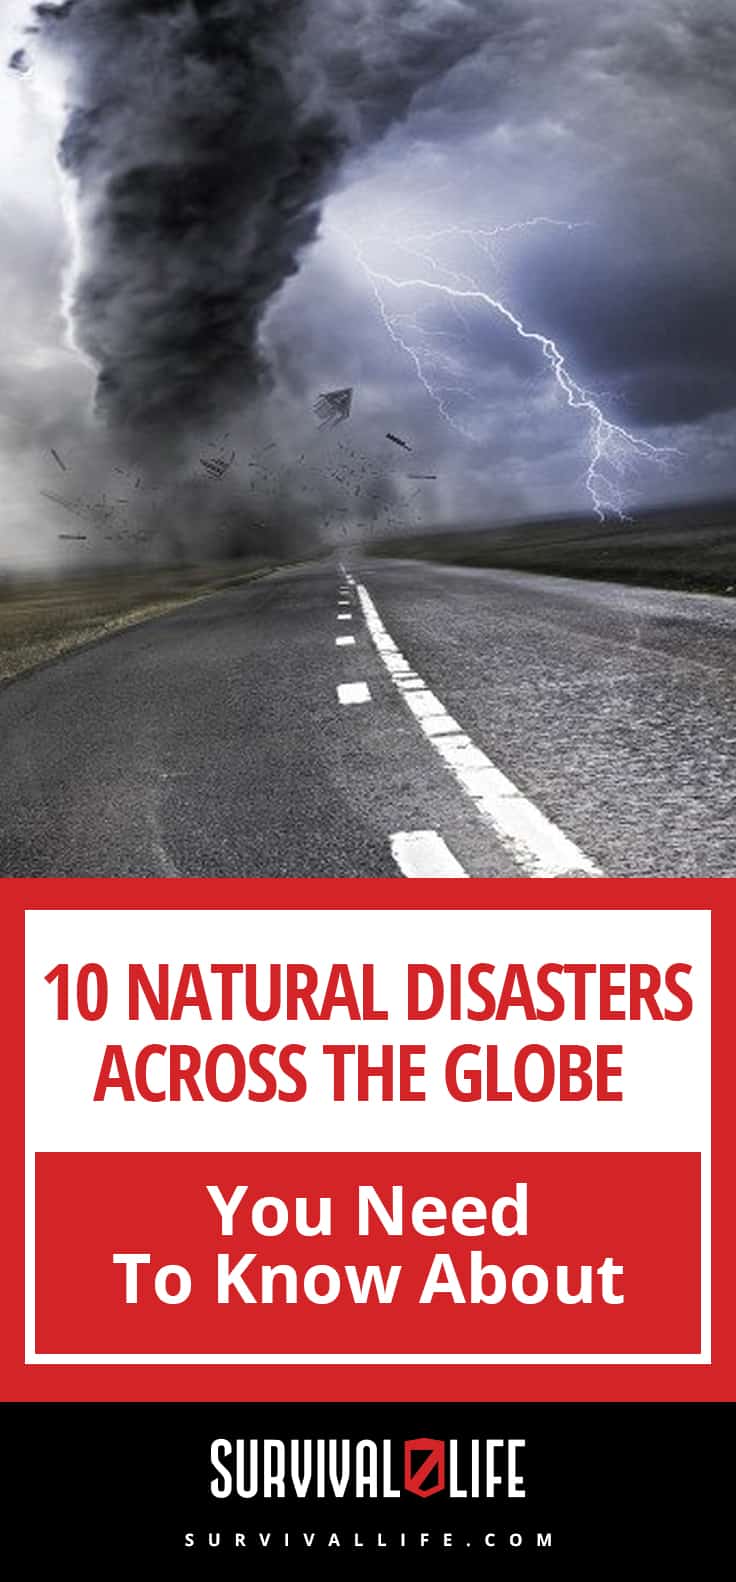 Check out 10 Natural Disasters Across The Globe You Need To Know About at https://survivallife.com/natural-disasters-around-the-world/